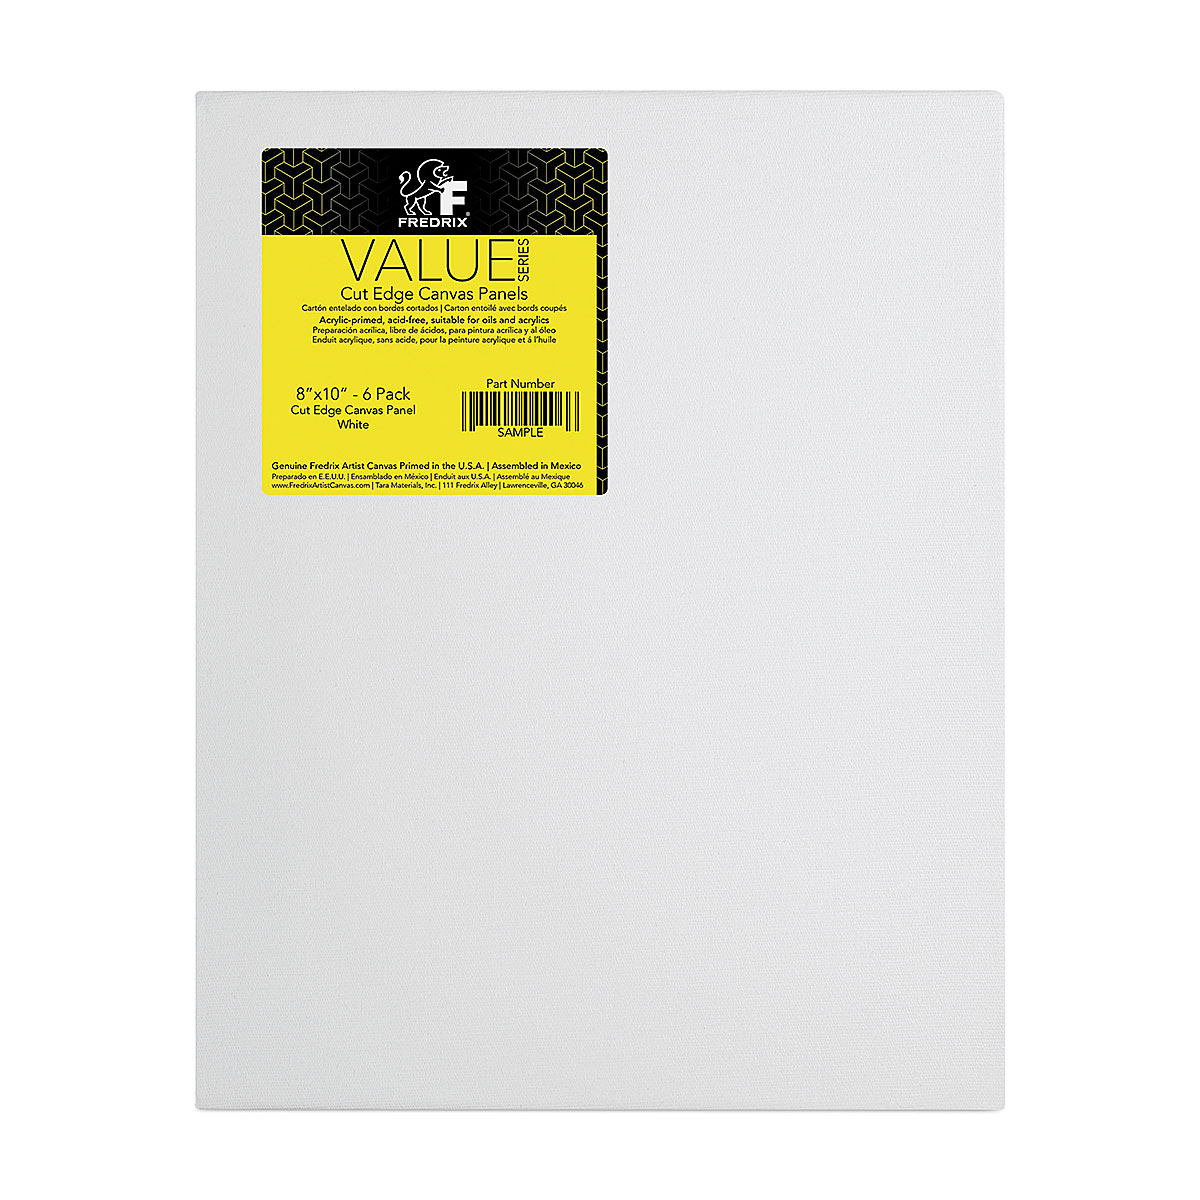 Fredrix Warp Resistant Canvas Panels 11 X 14 In Pack Of 3 